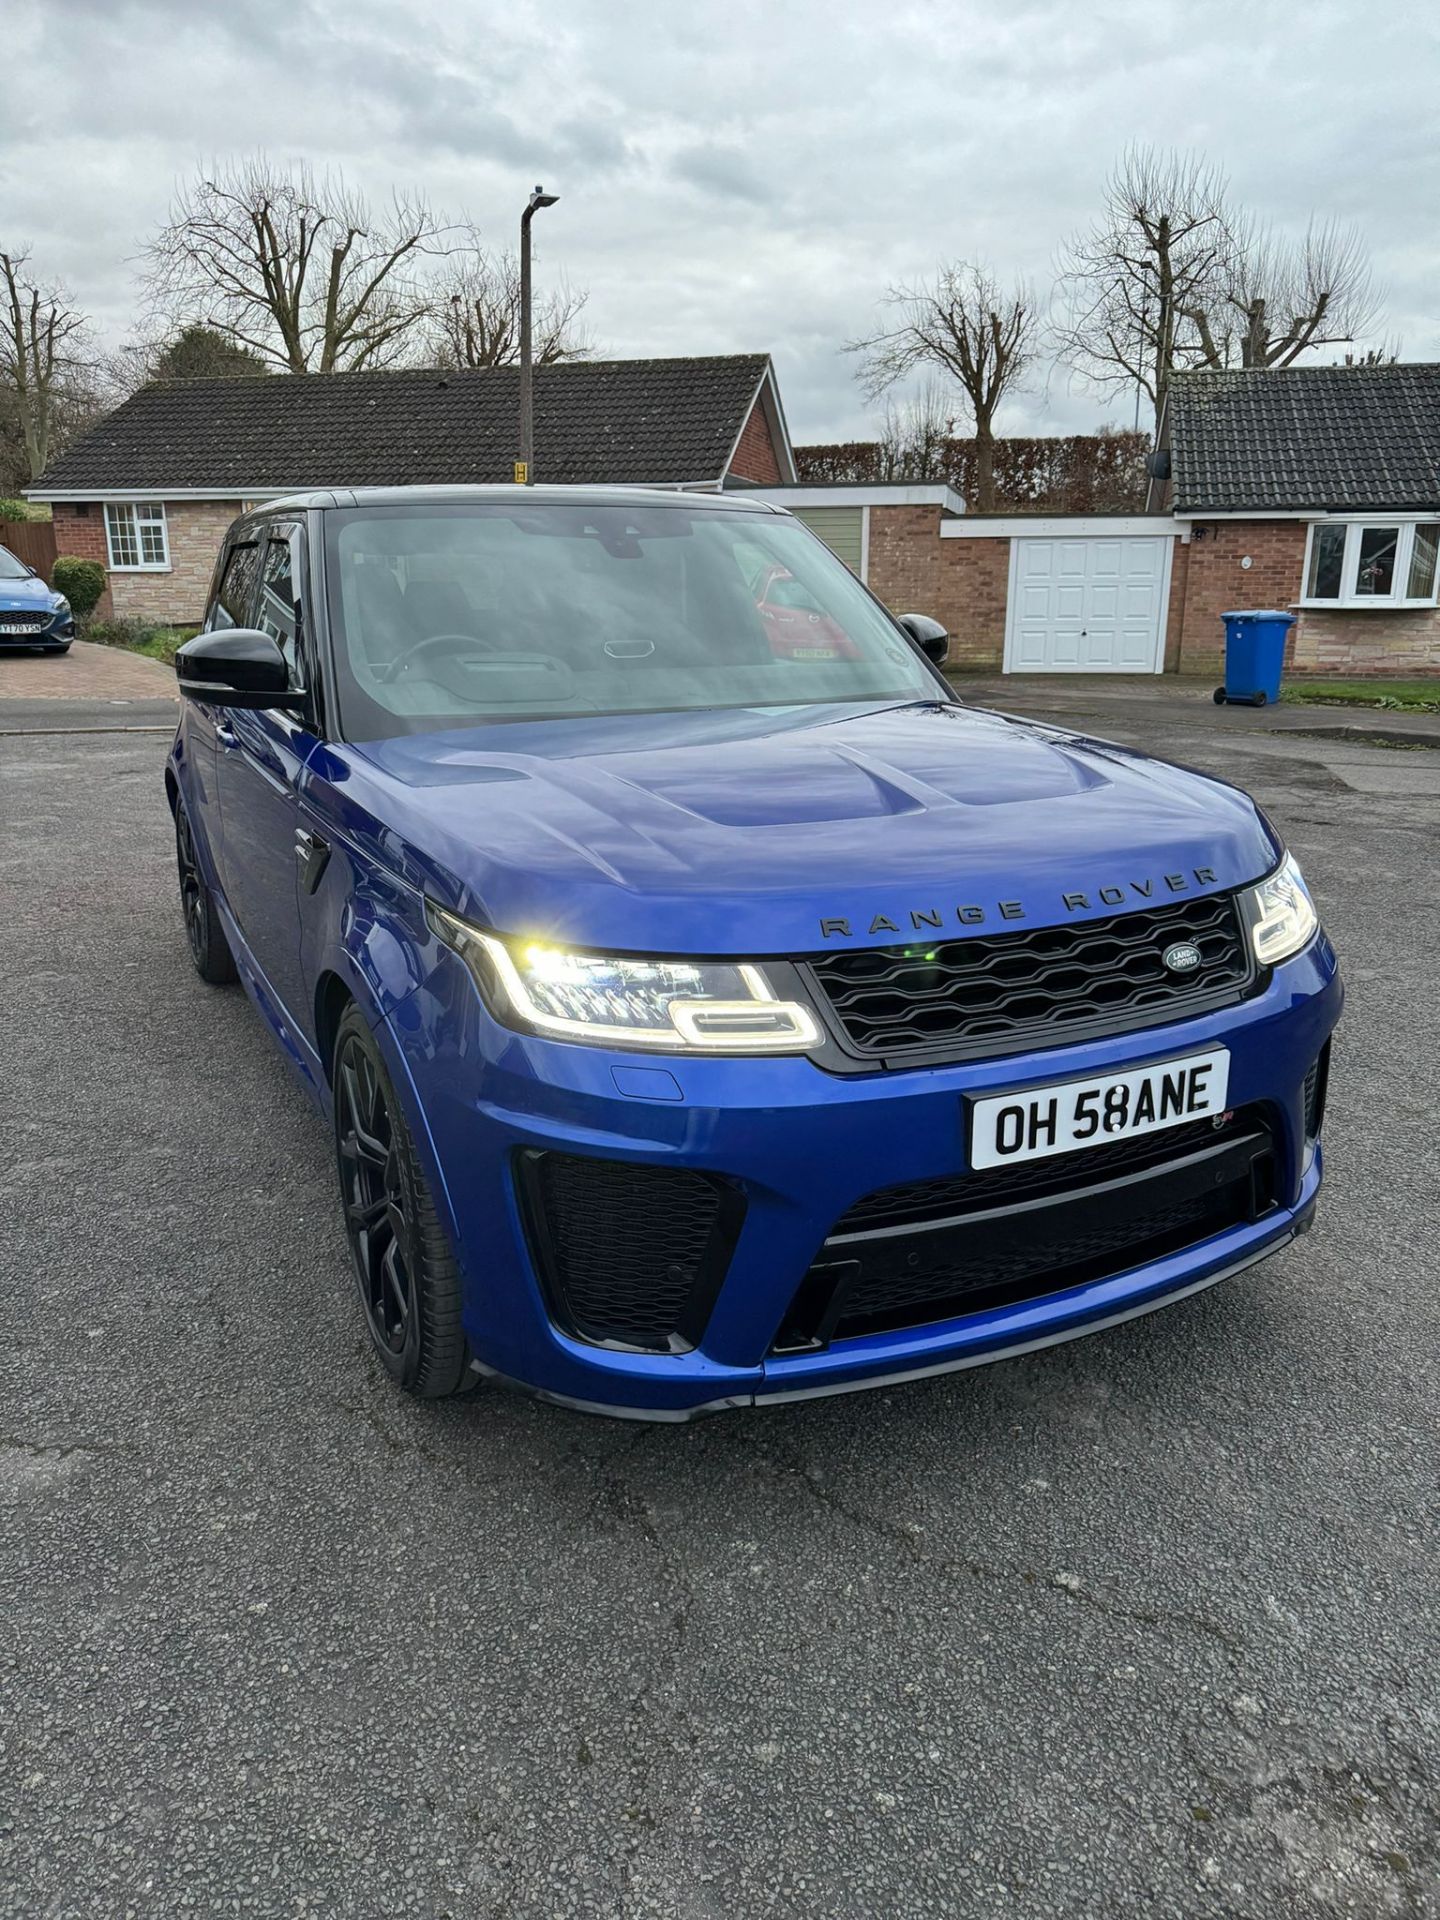 2018 18 RANGE ROVER SVR - 62K MILES WITH FULL LAND ROVER HISTORY - EXTREMELY CLEAN EXAMPLE. - Image 2 of 10